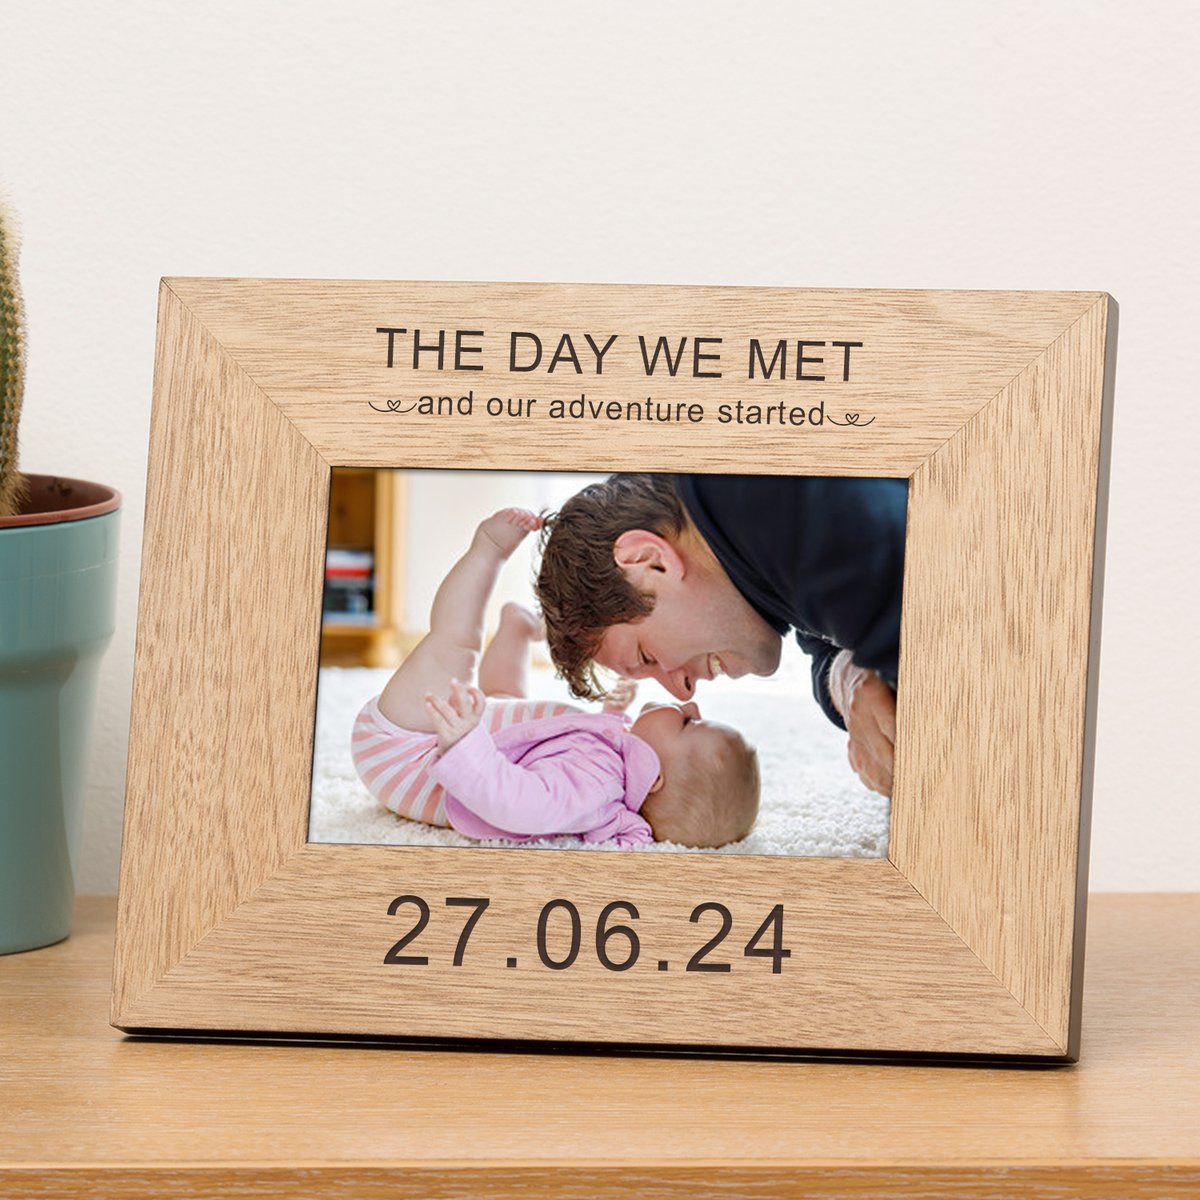 Personalised with any date, this 'The day we met' photo frame would make a lovely gift idea for any parent lilybluestore.com/products/perso…

#giftideas #fathersday #MHHSBD